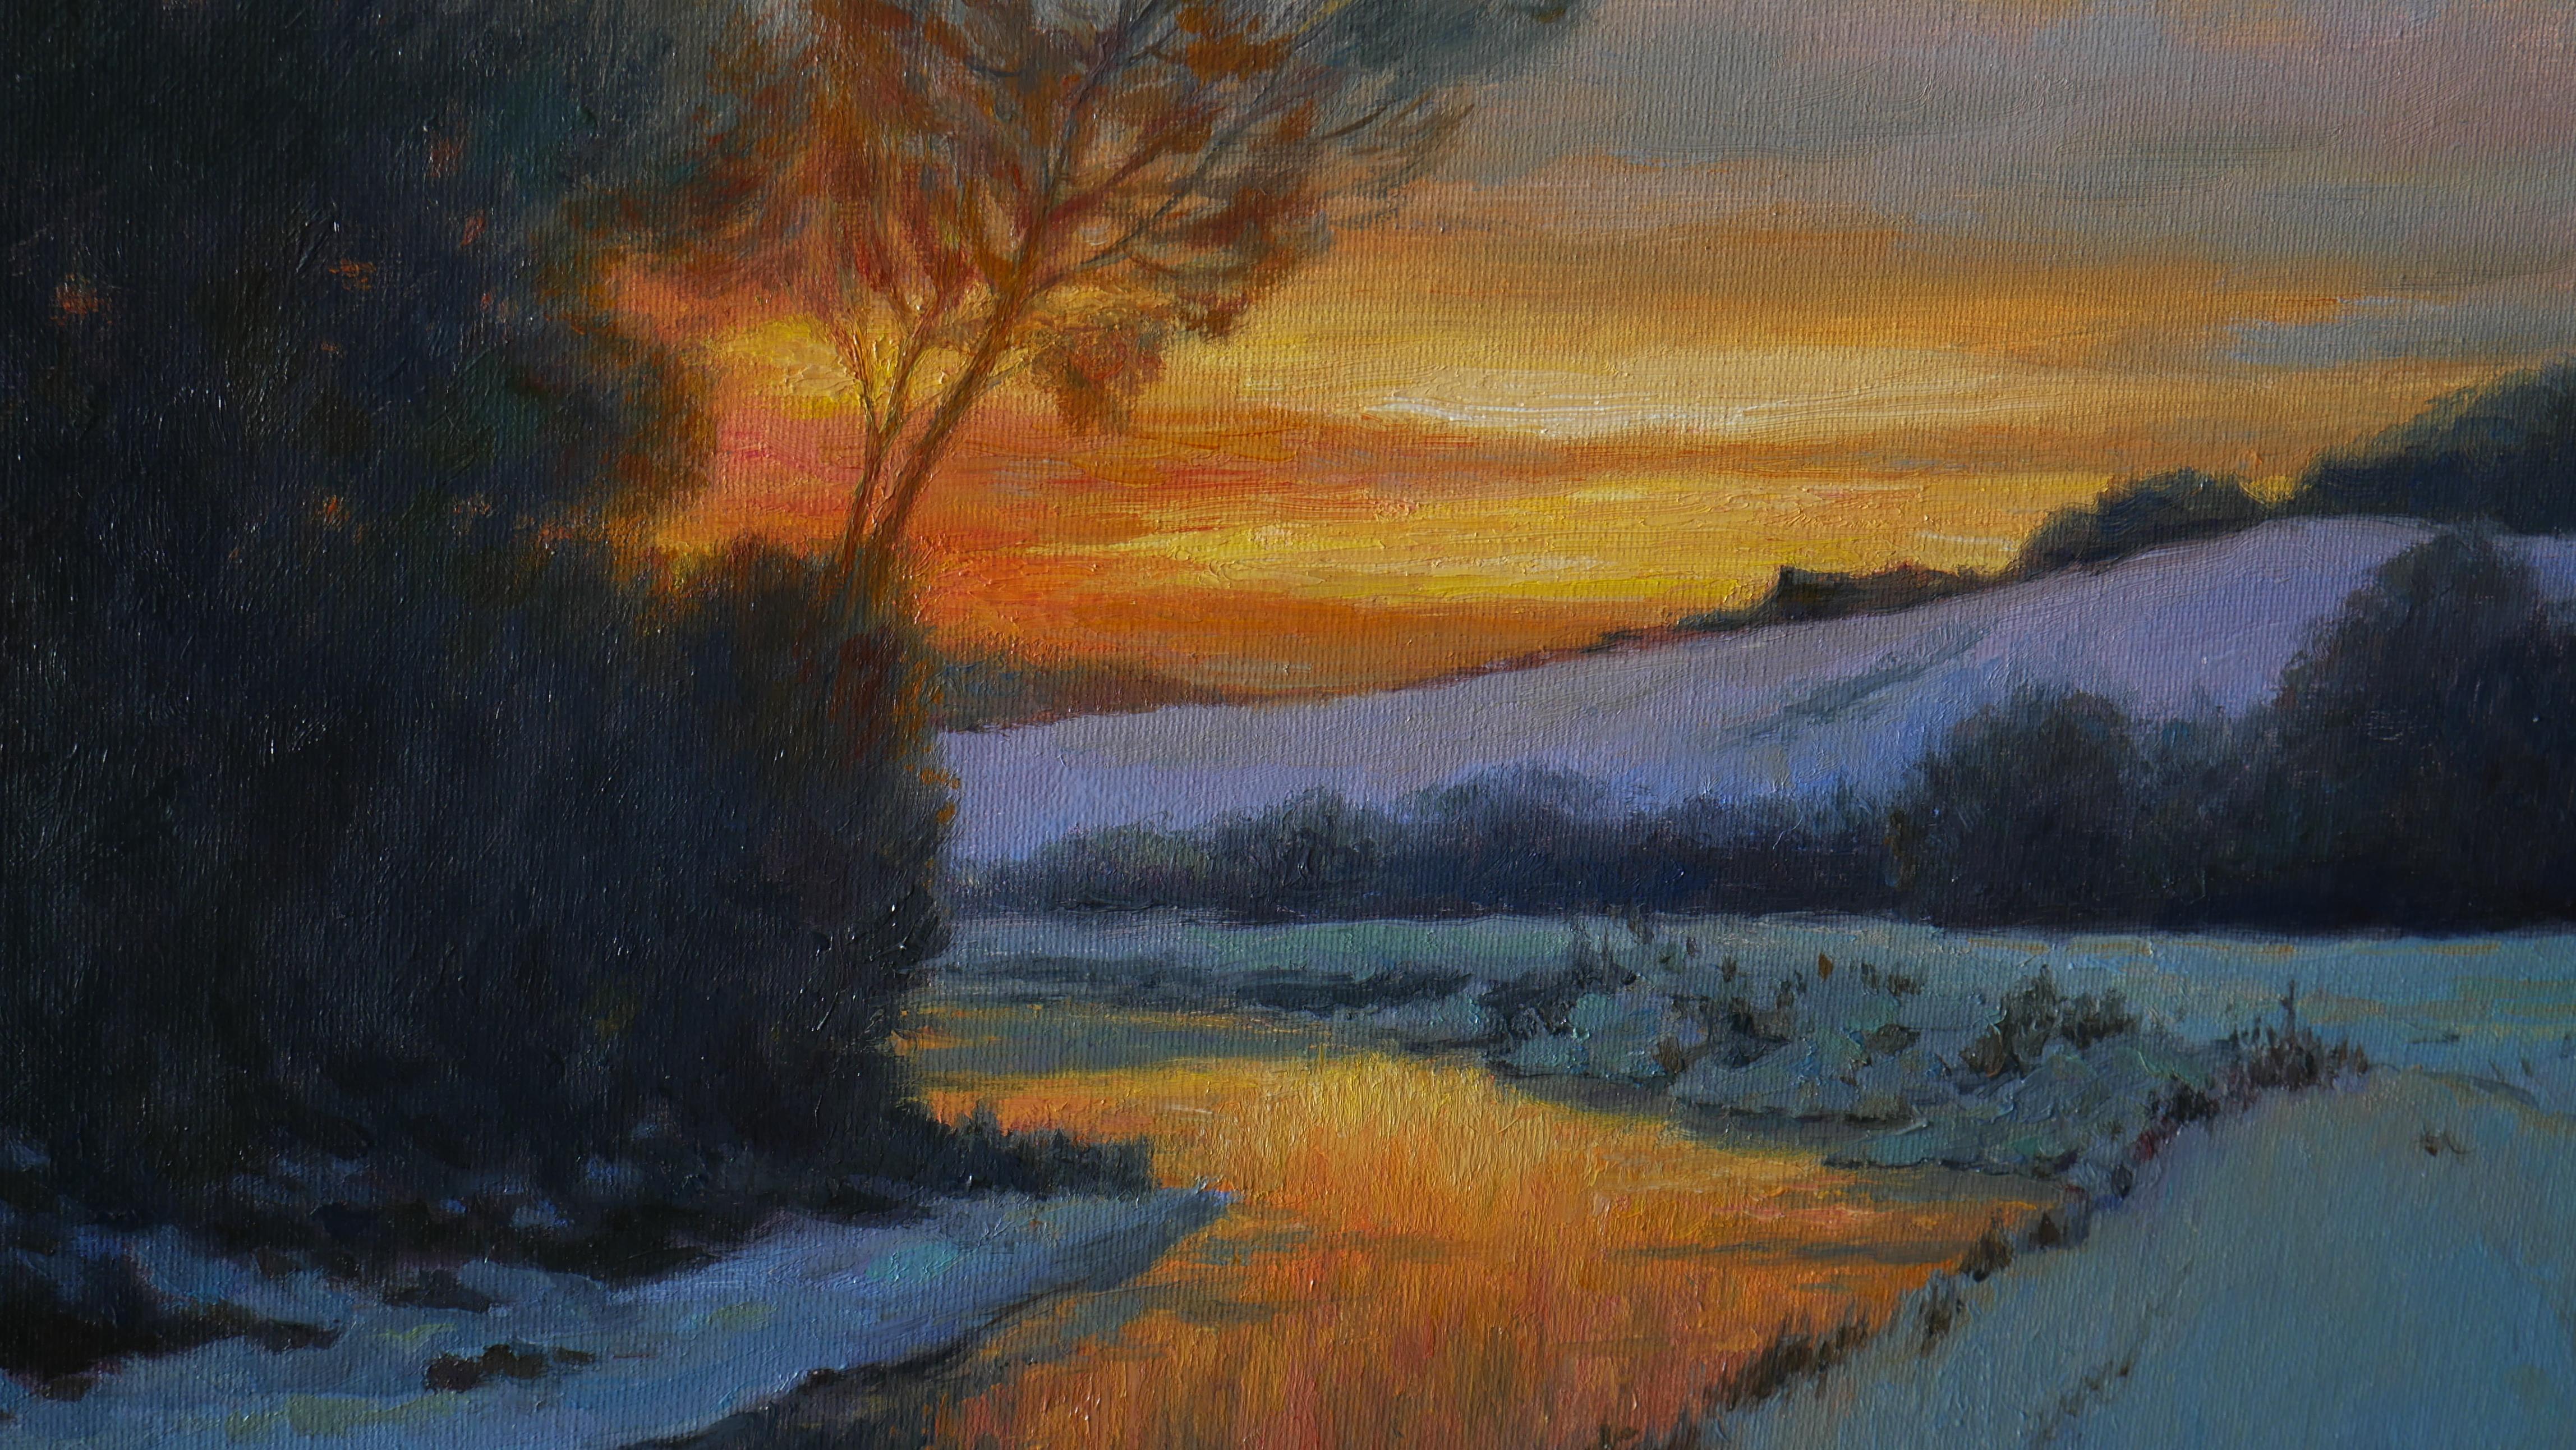 Fleeting - winter evening landscape painting For Sale 2